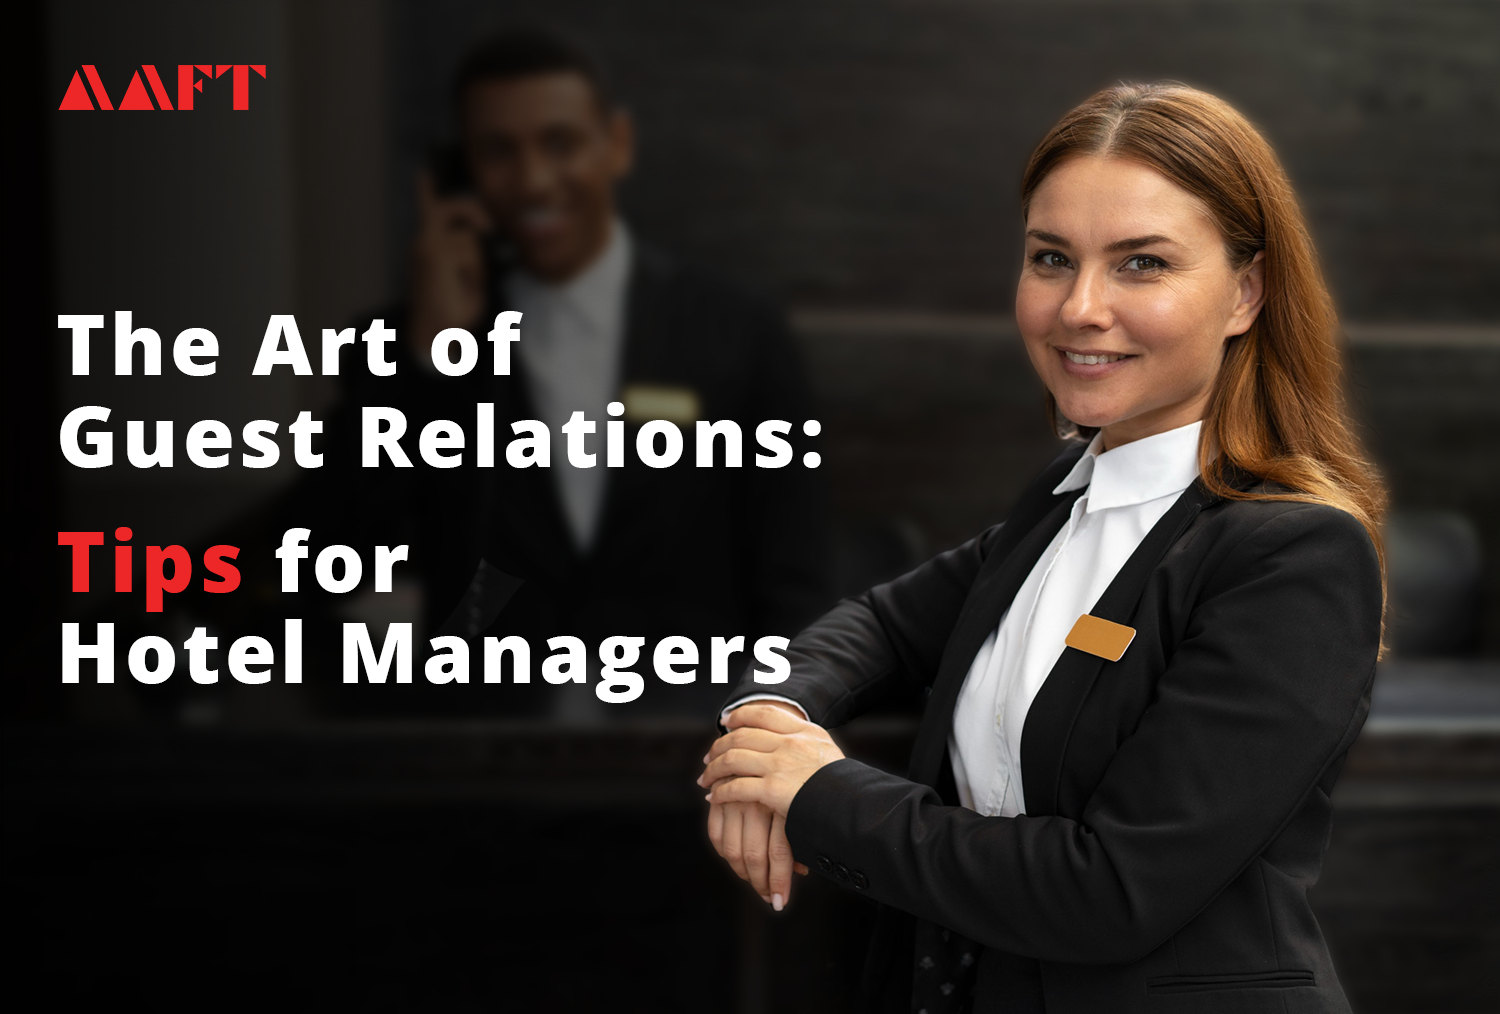 The Art of Guest Relations: Tips for Hotel Managers